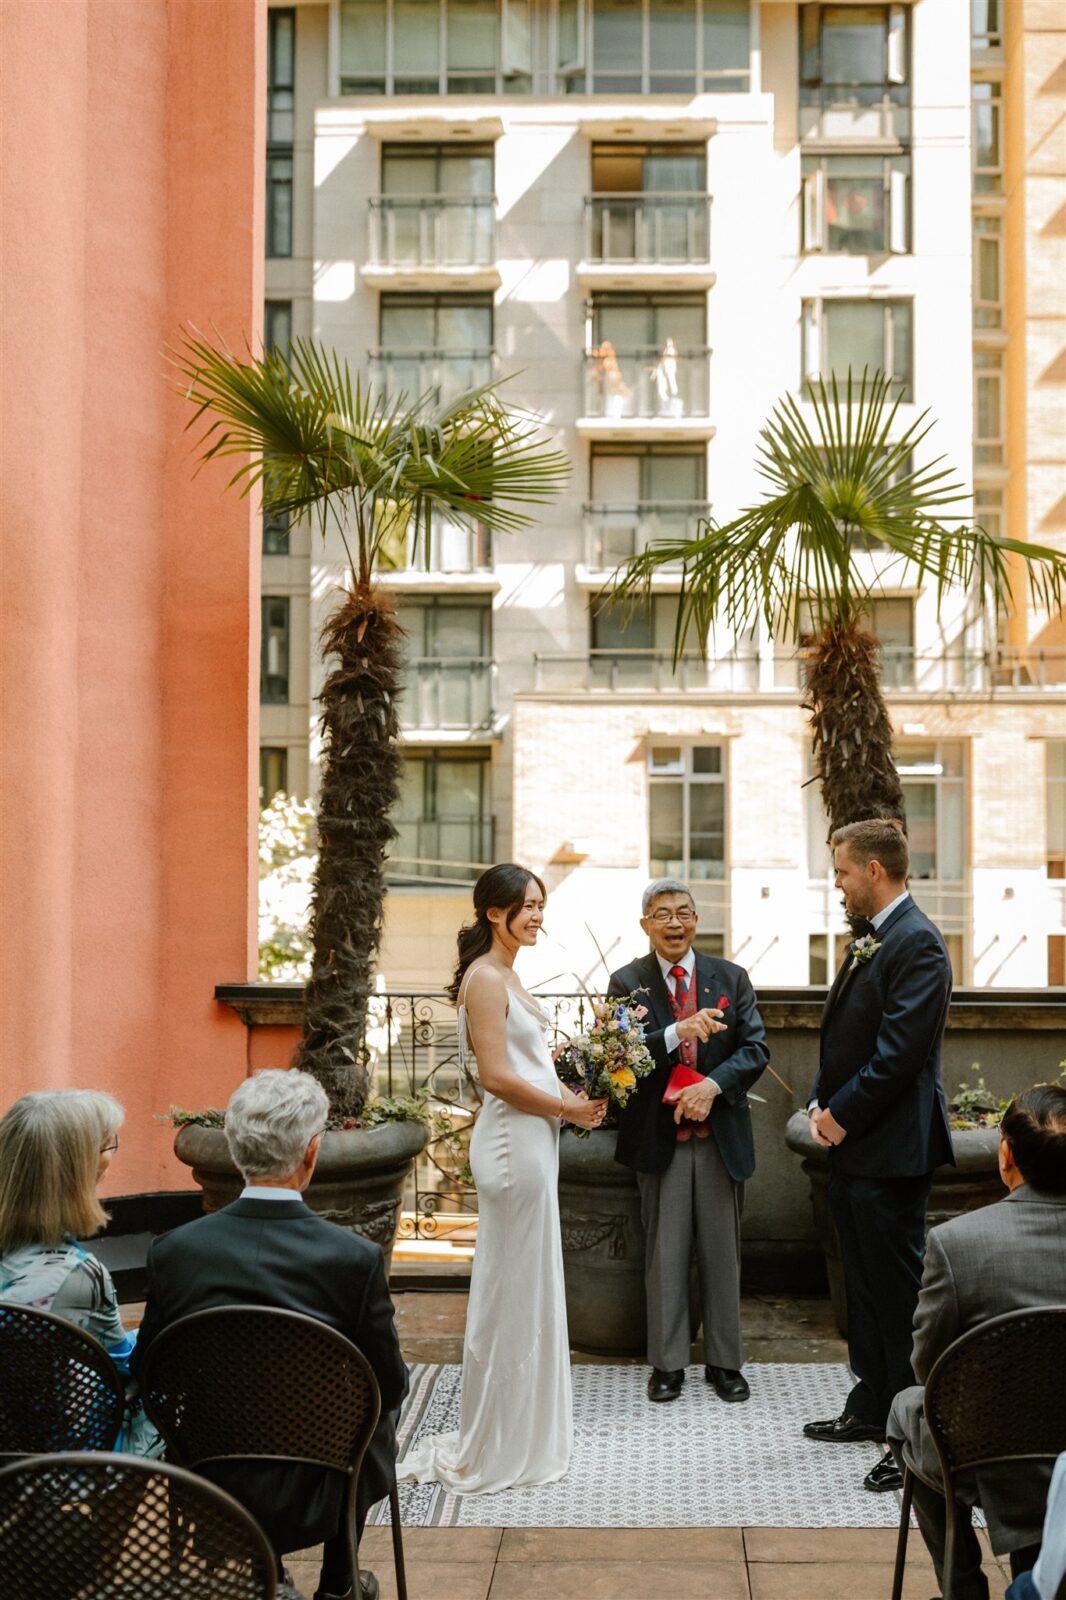 Urban rooftop wedding ceremony at Fable Diner and Bar in downtown Vancouver, captured by Abigail Eveline Photography.